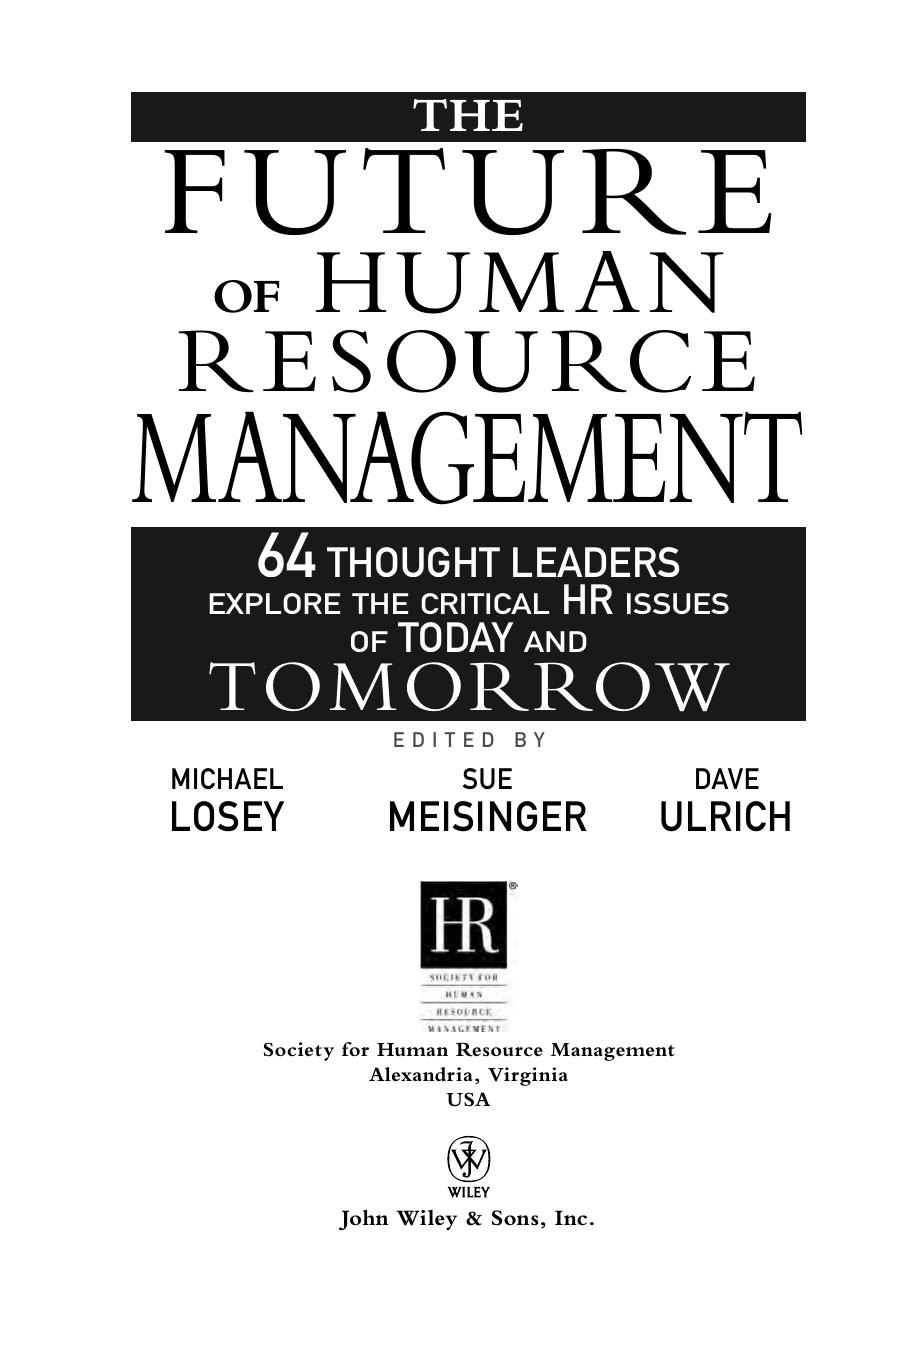 Ulrich D., Losey M., Meisinger S. Future of Human Resource Management 64 Thought Leaders Explore the Critical HR Issues of Today and Tomorrow 2005